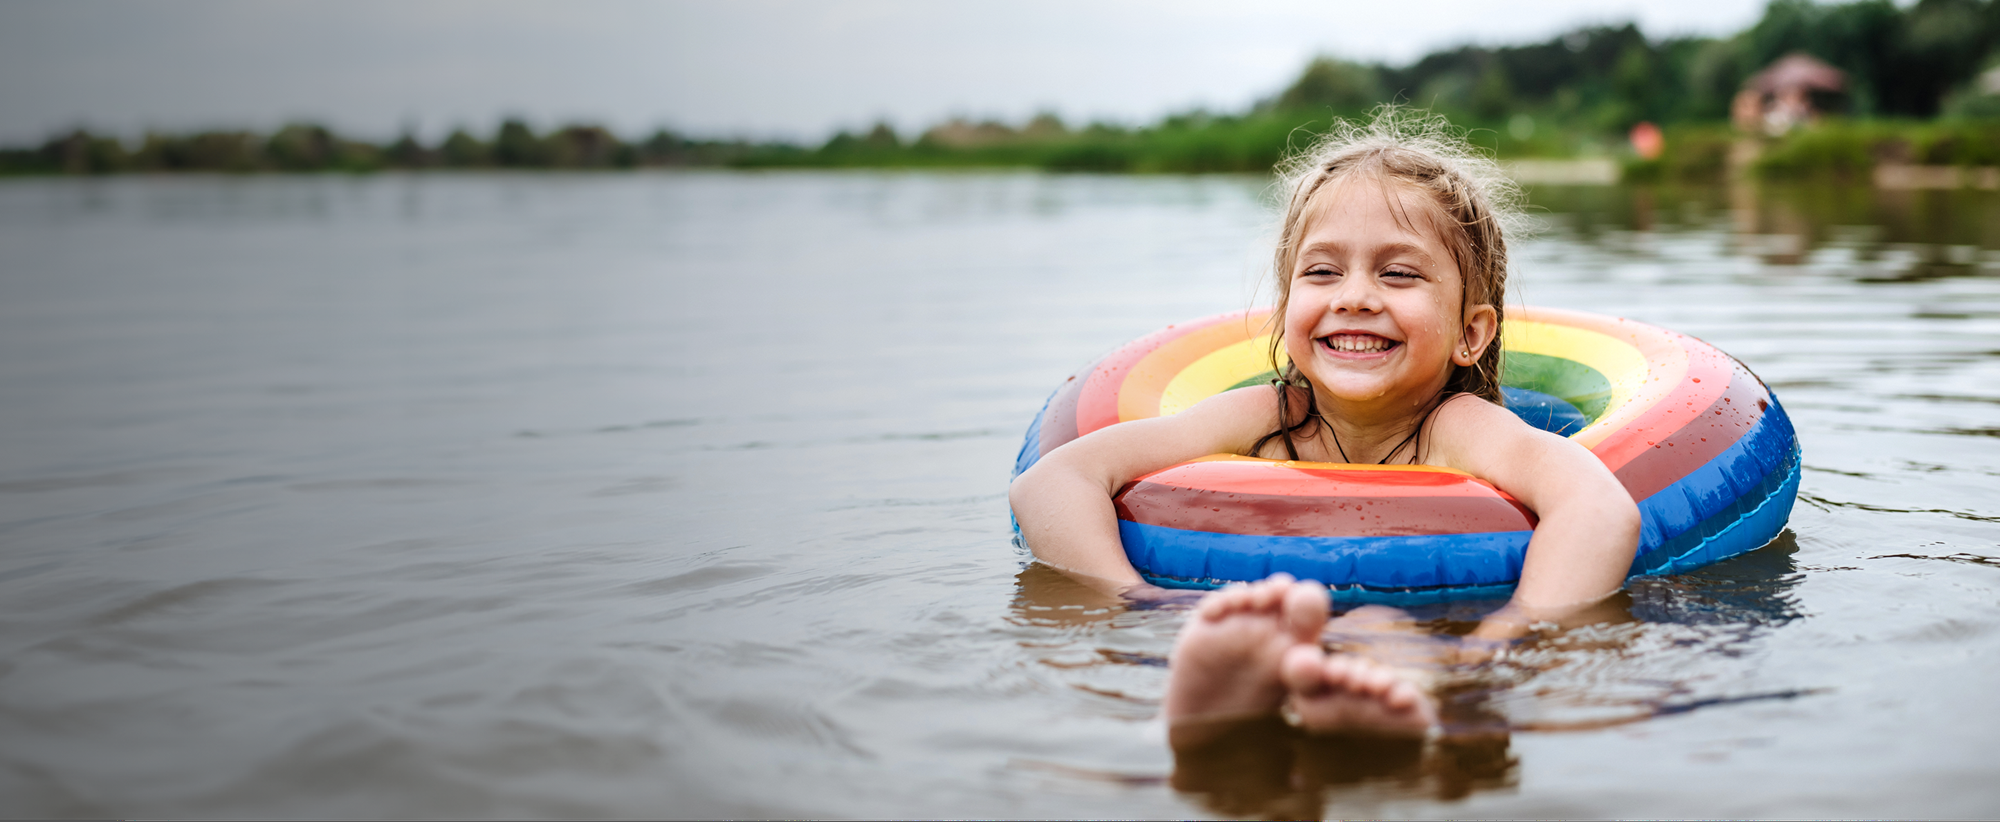 A smiling child in a rubber ring in a lake